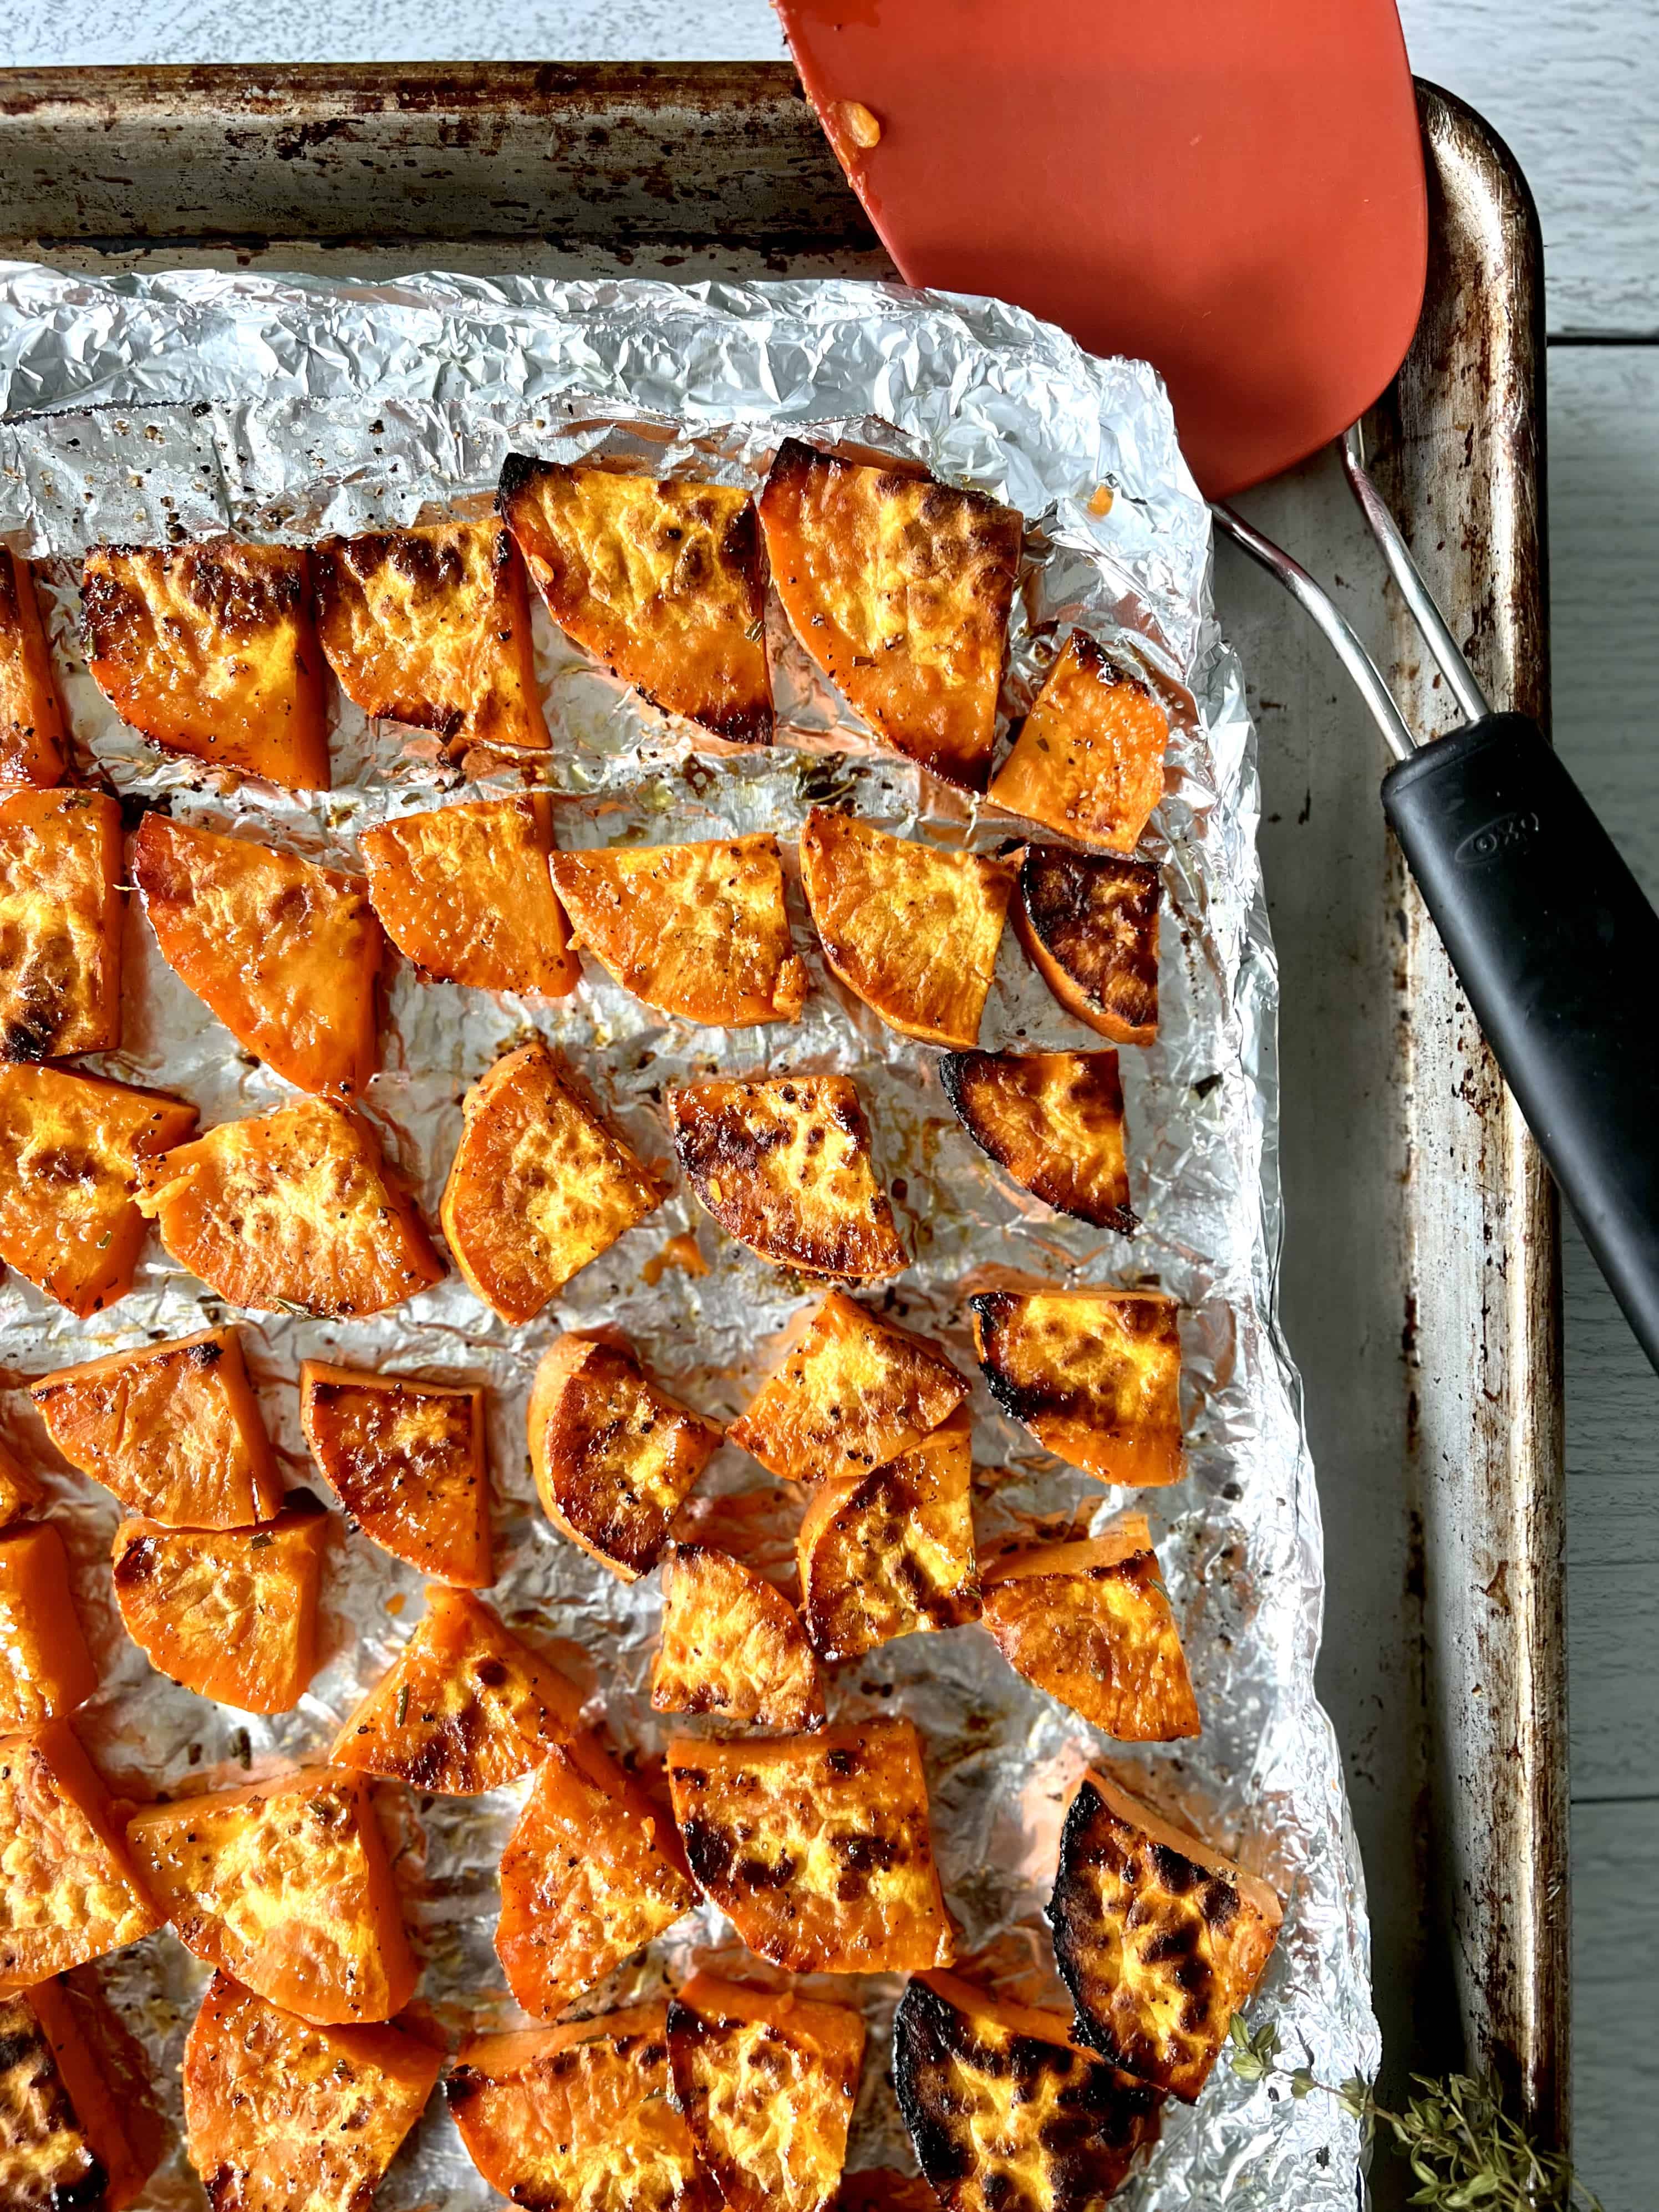 A foil-lined baking sheet with slices of grilled yams on it, and a spatula.